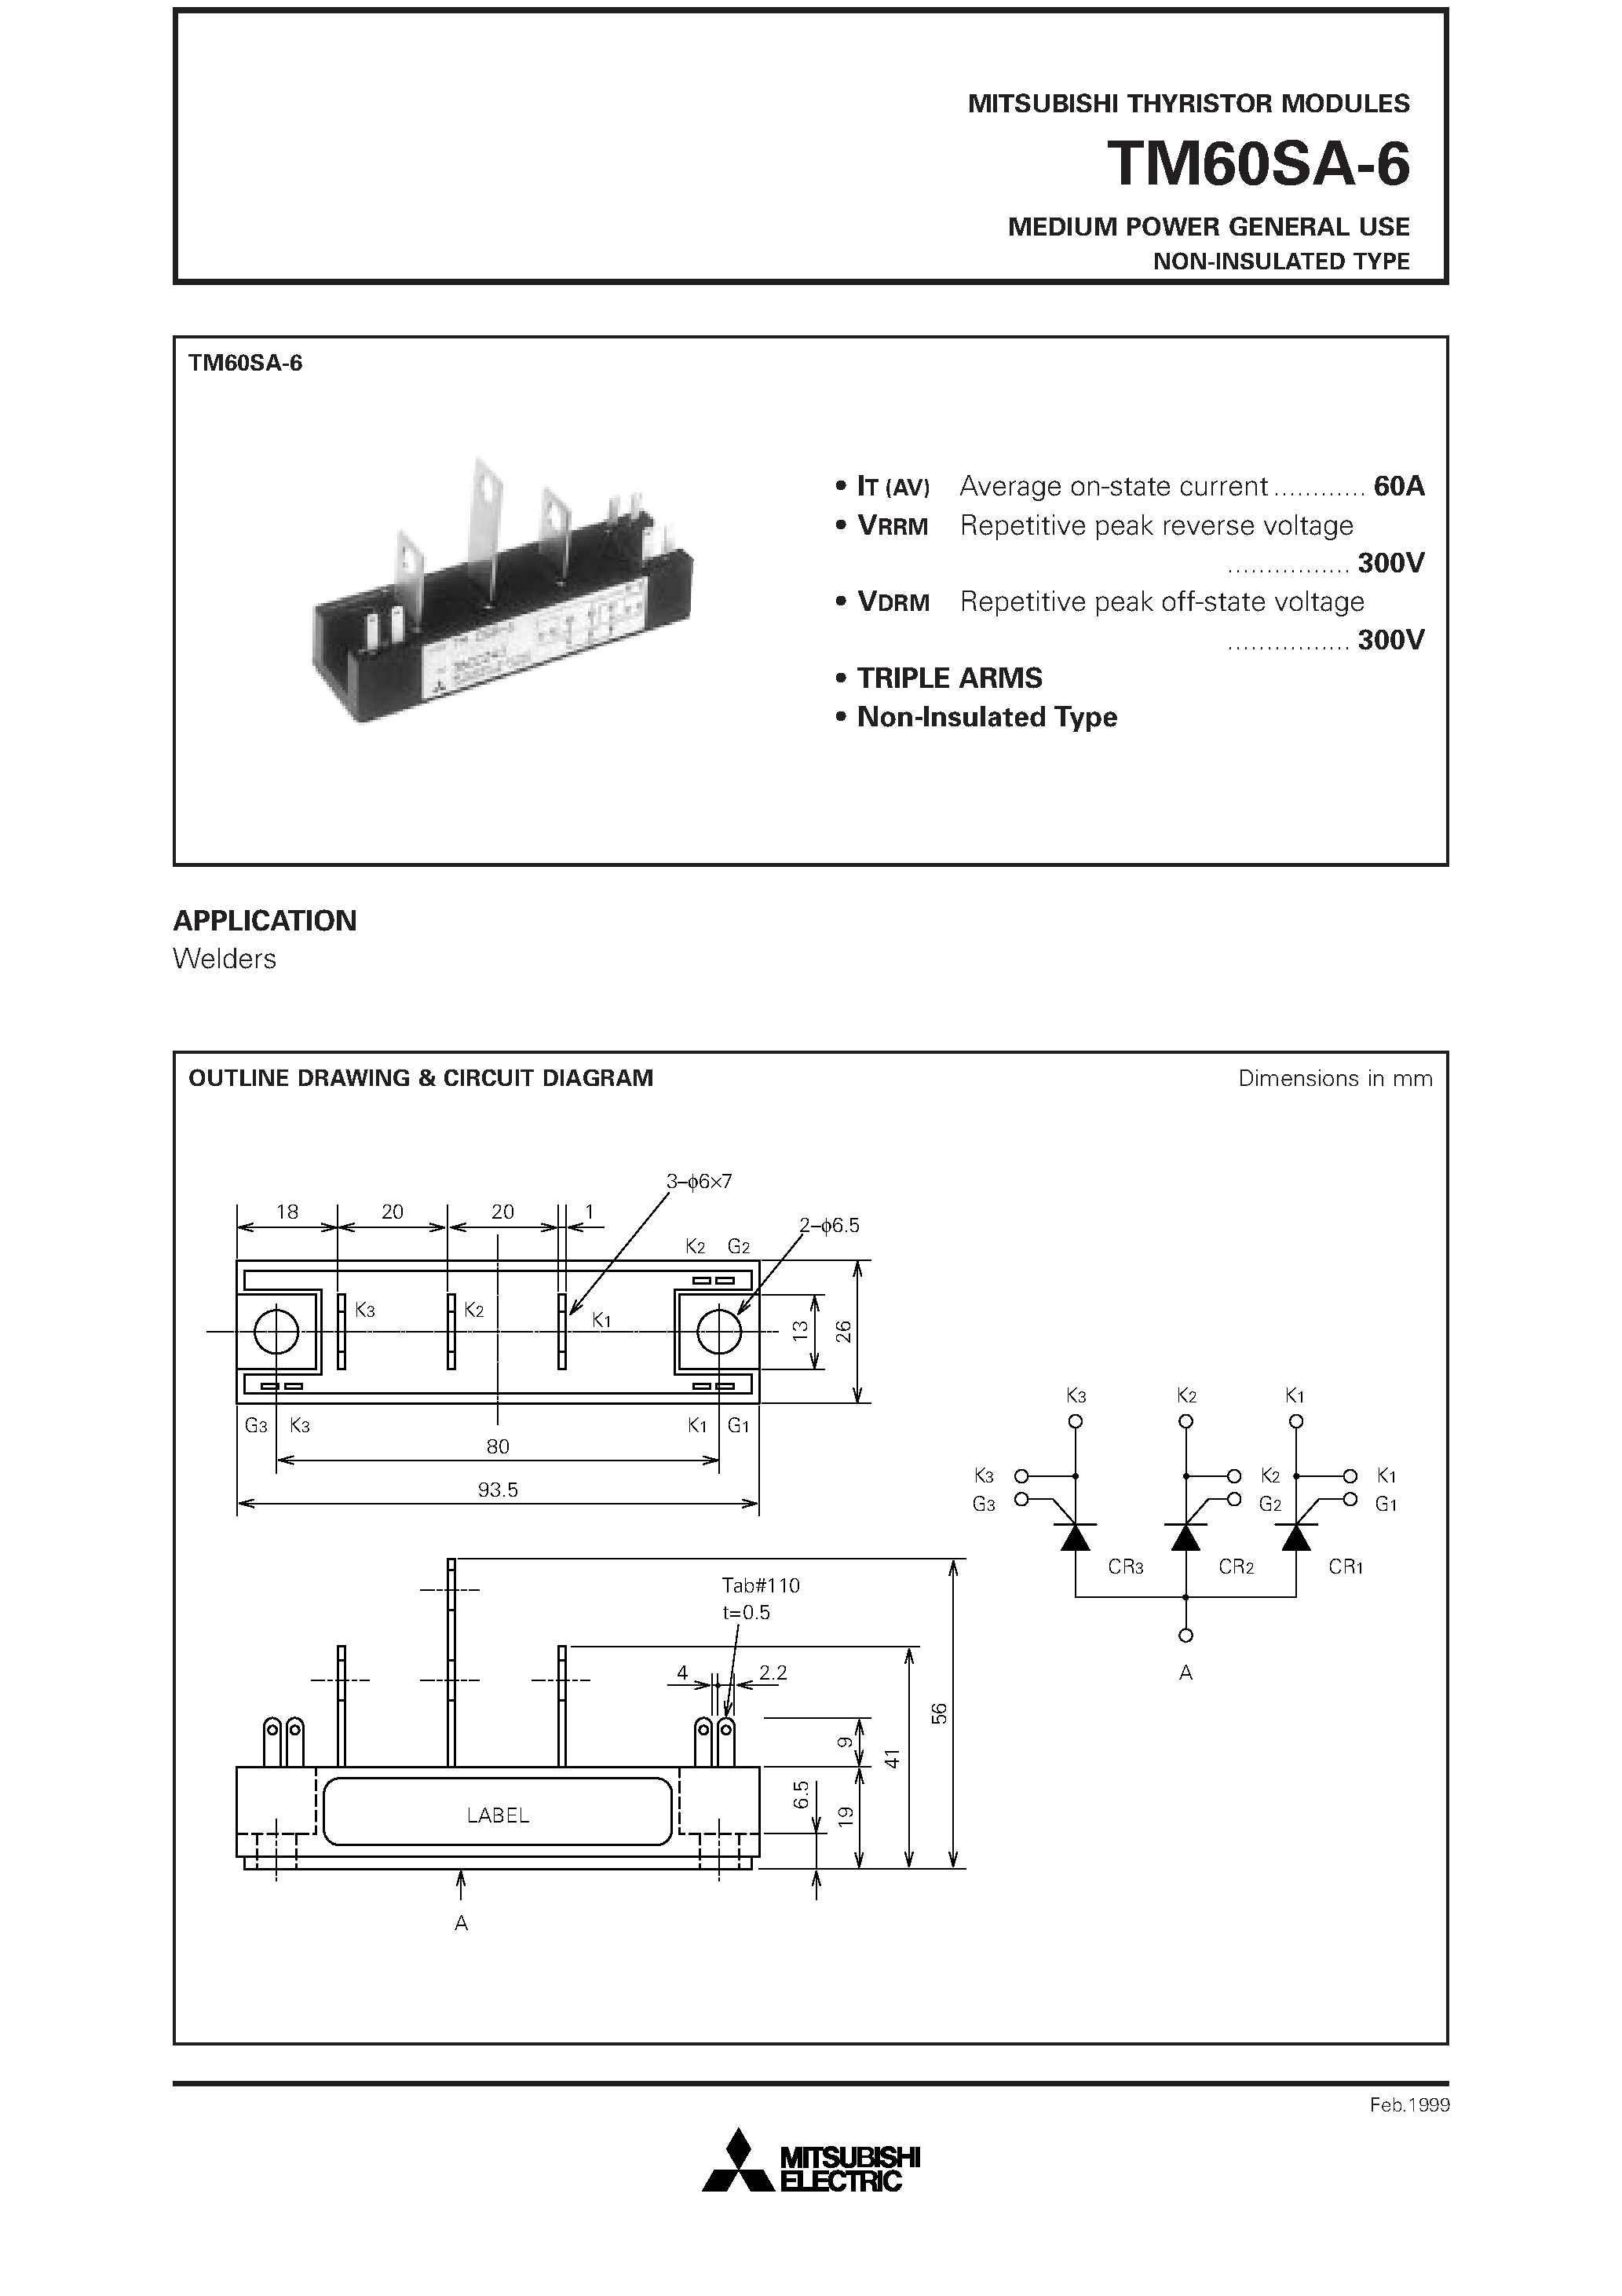 Datasheet TM60SA-6 - MEDIUM POWER GENERAL USE NON-INSULATED TYPE page 1